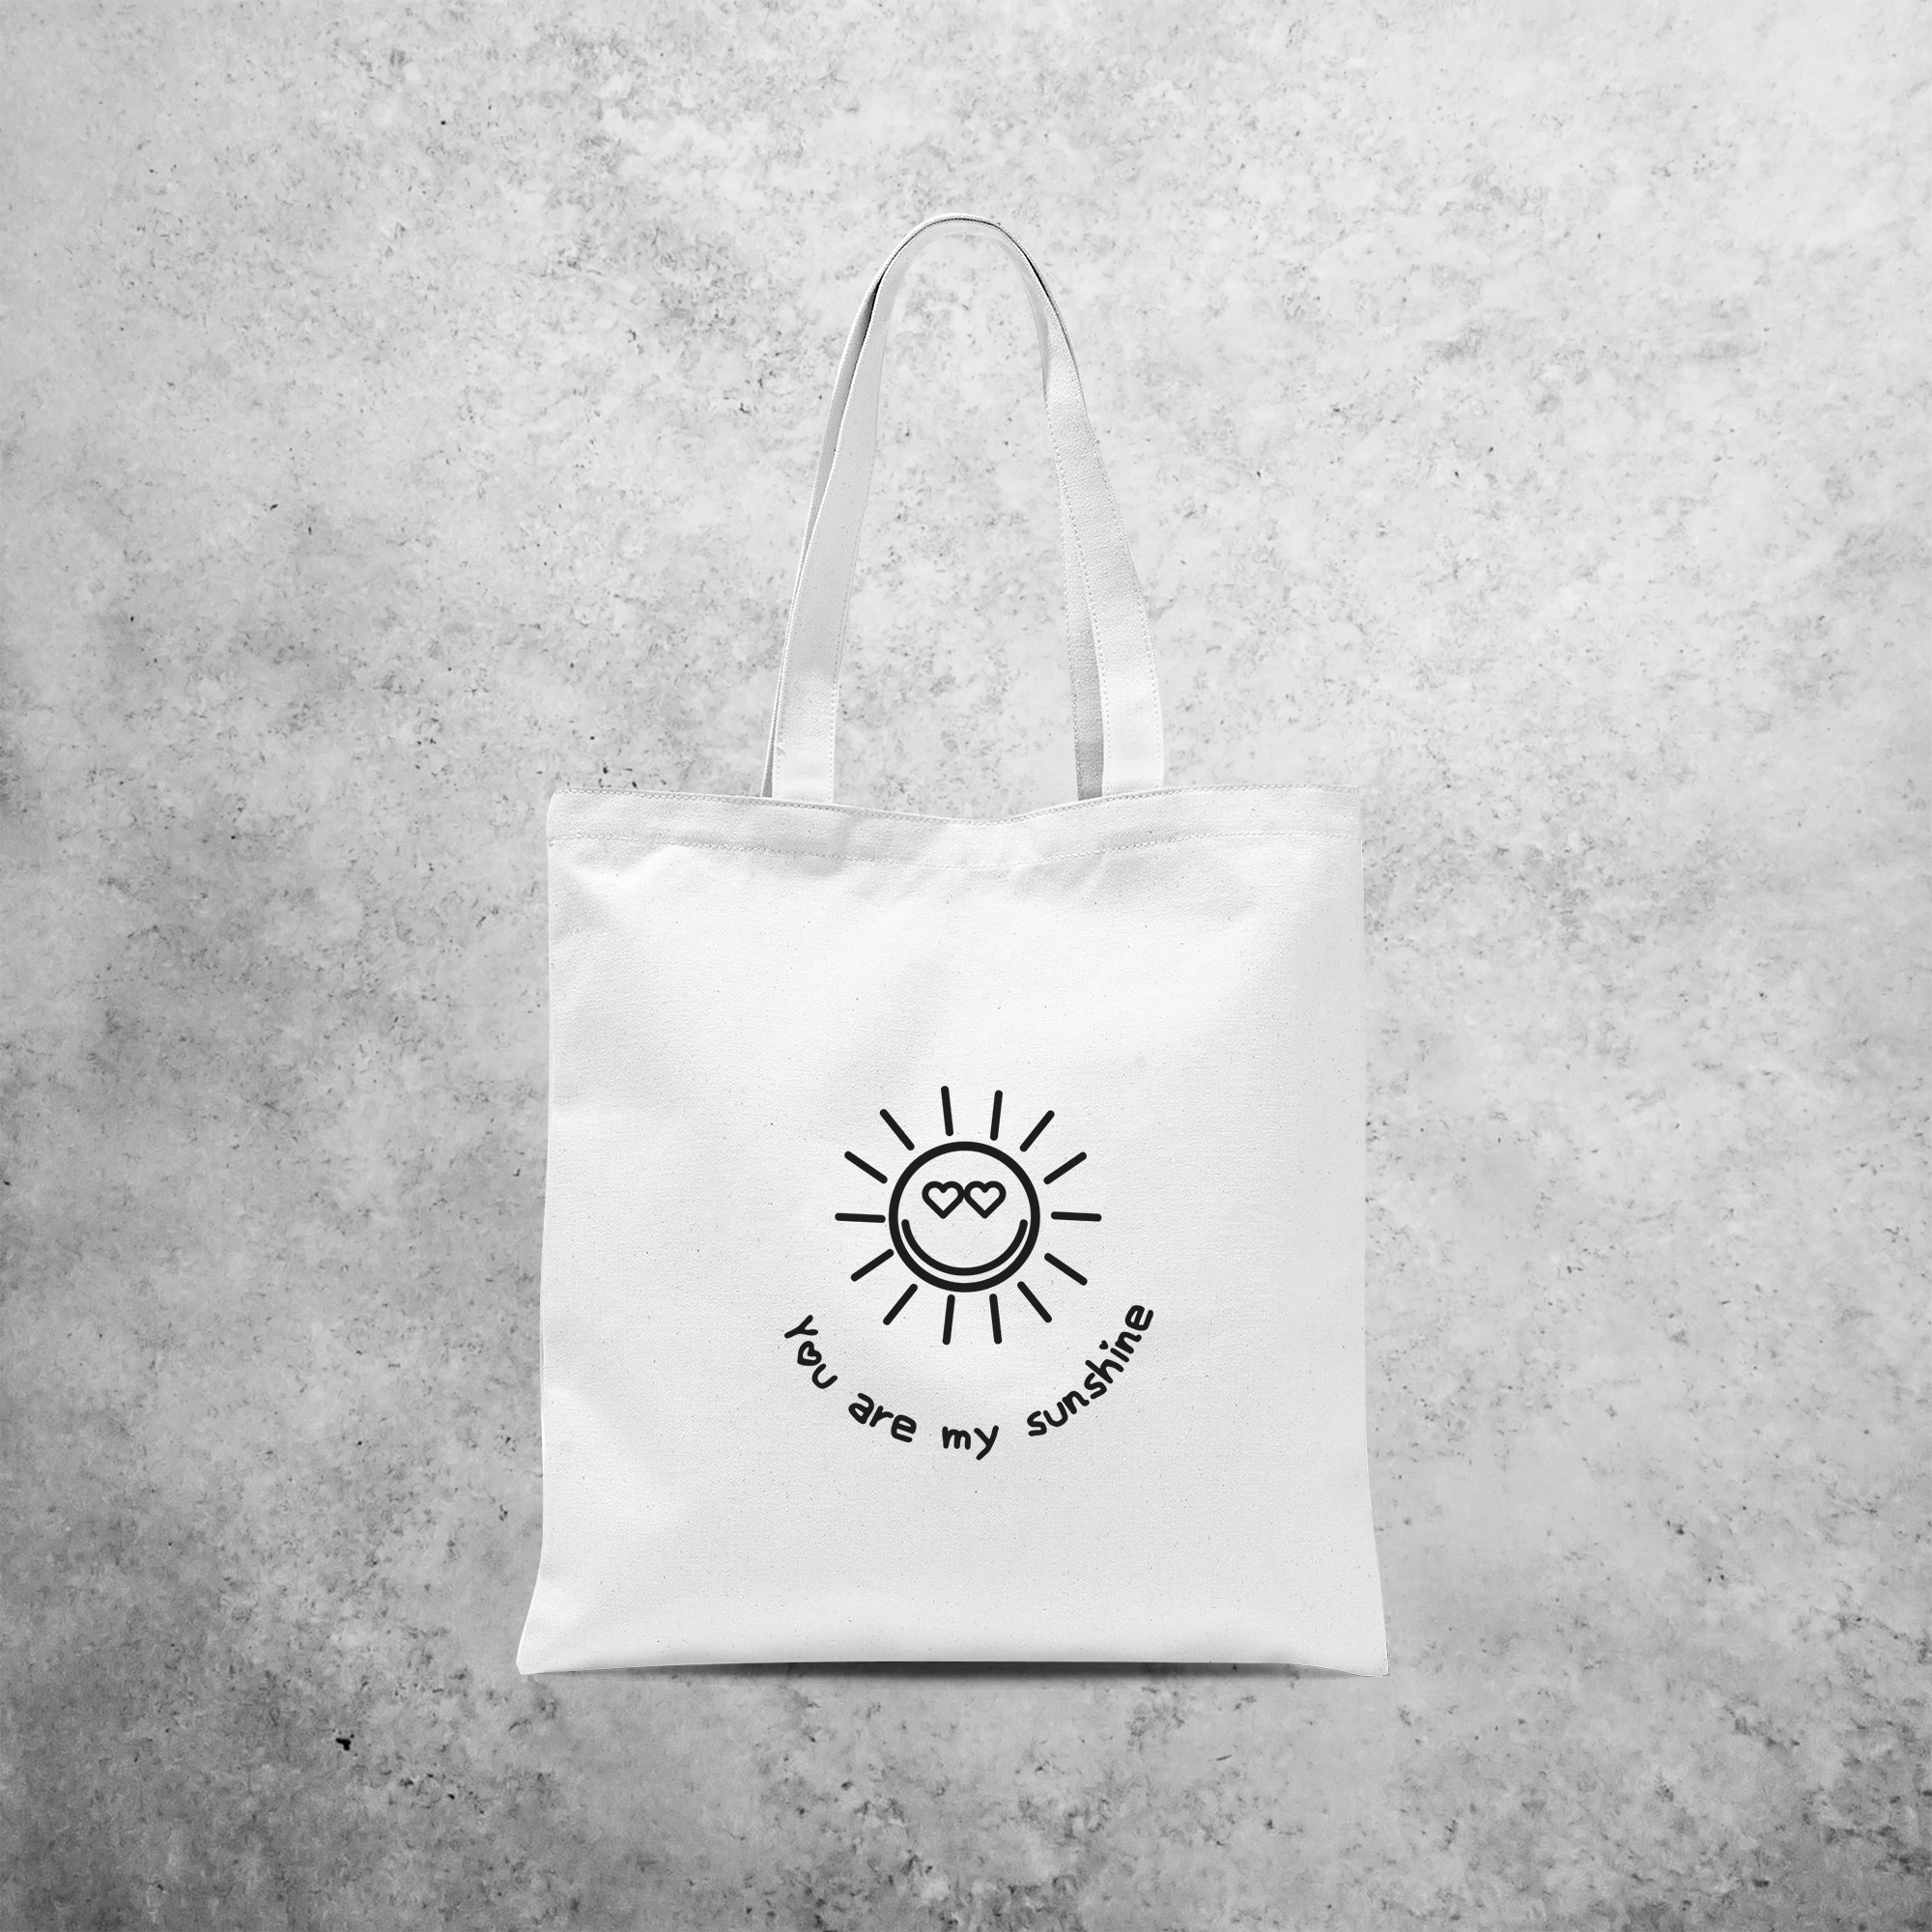 'You are my sunshine' tote bag